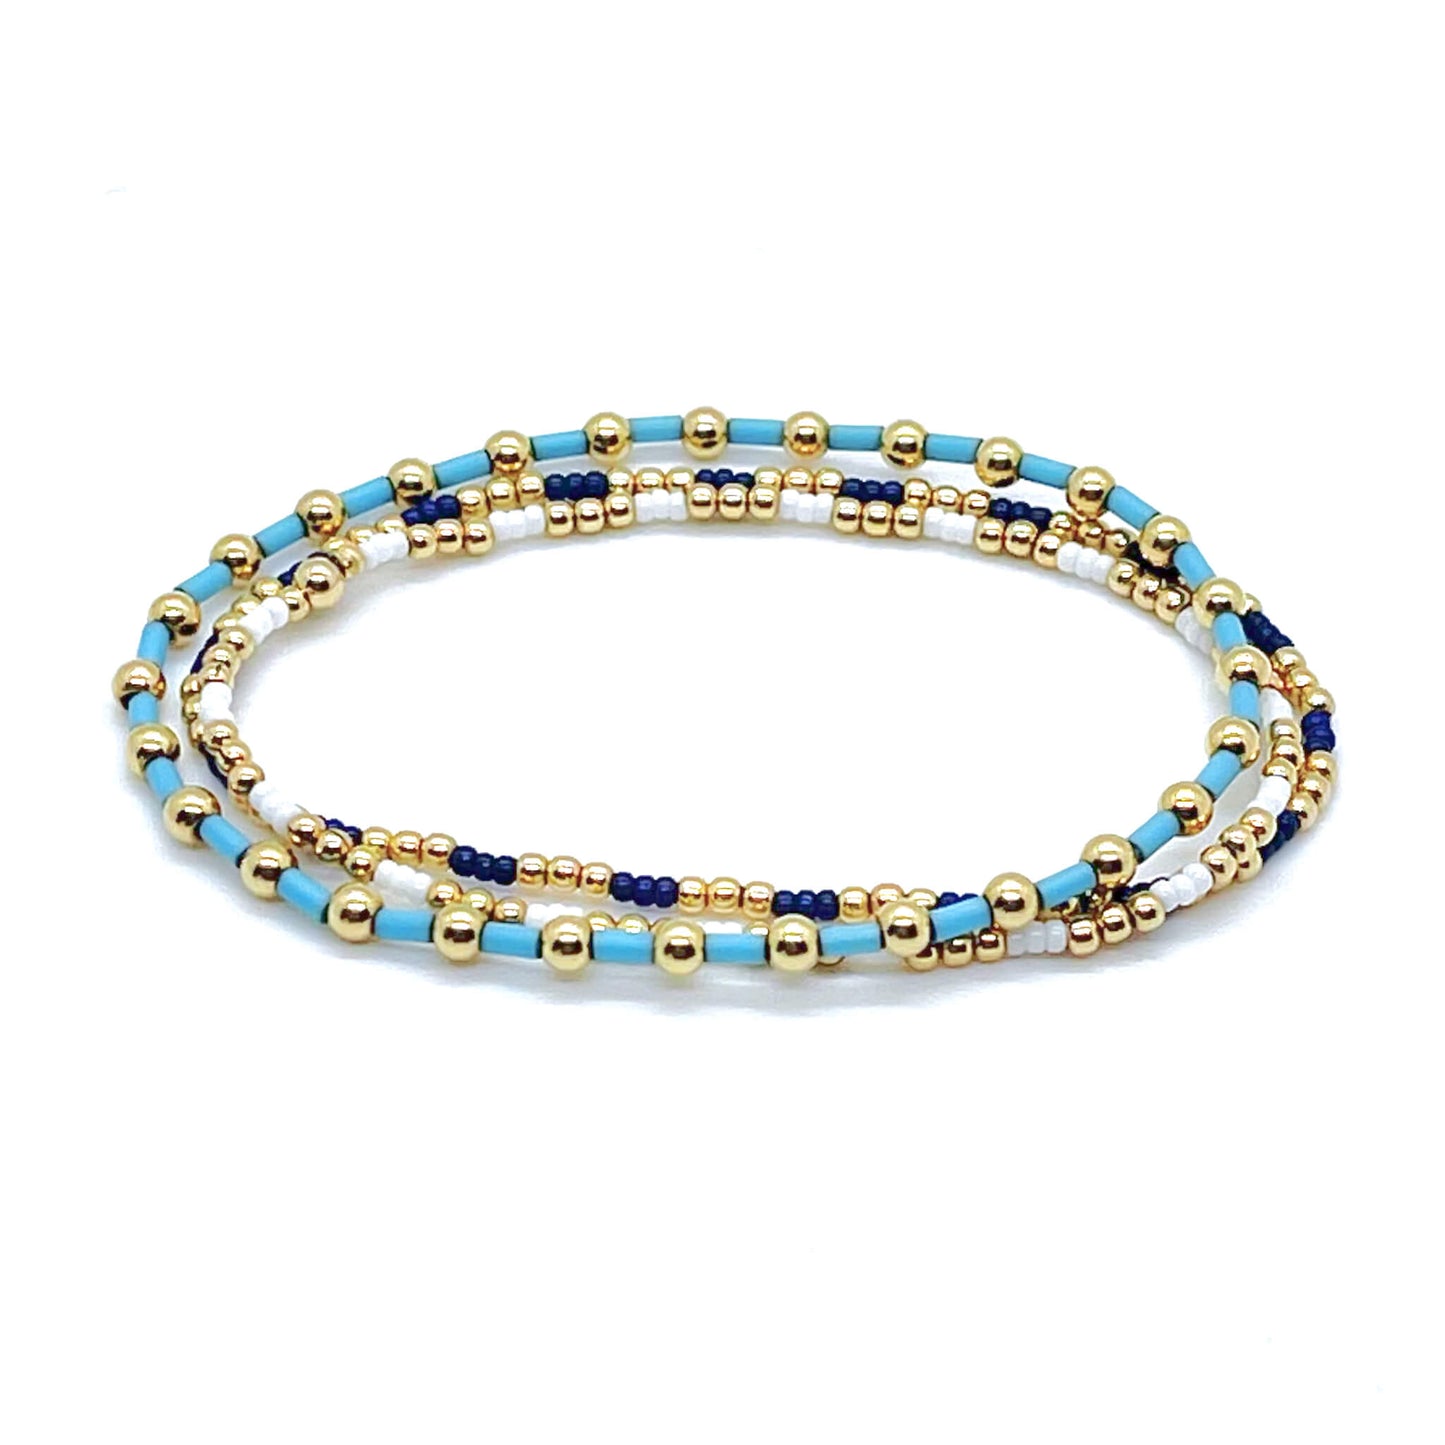 Gold ball bracelets with light blue, white, and navy blue seed beads on elastic stretch. Set of 3.